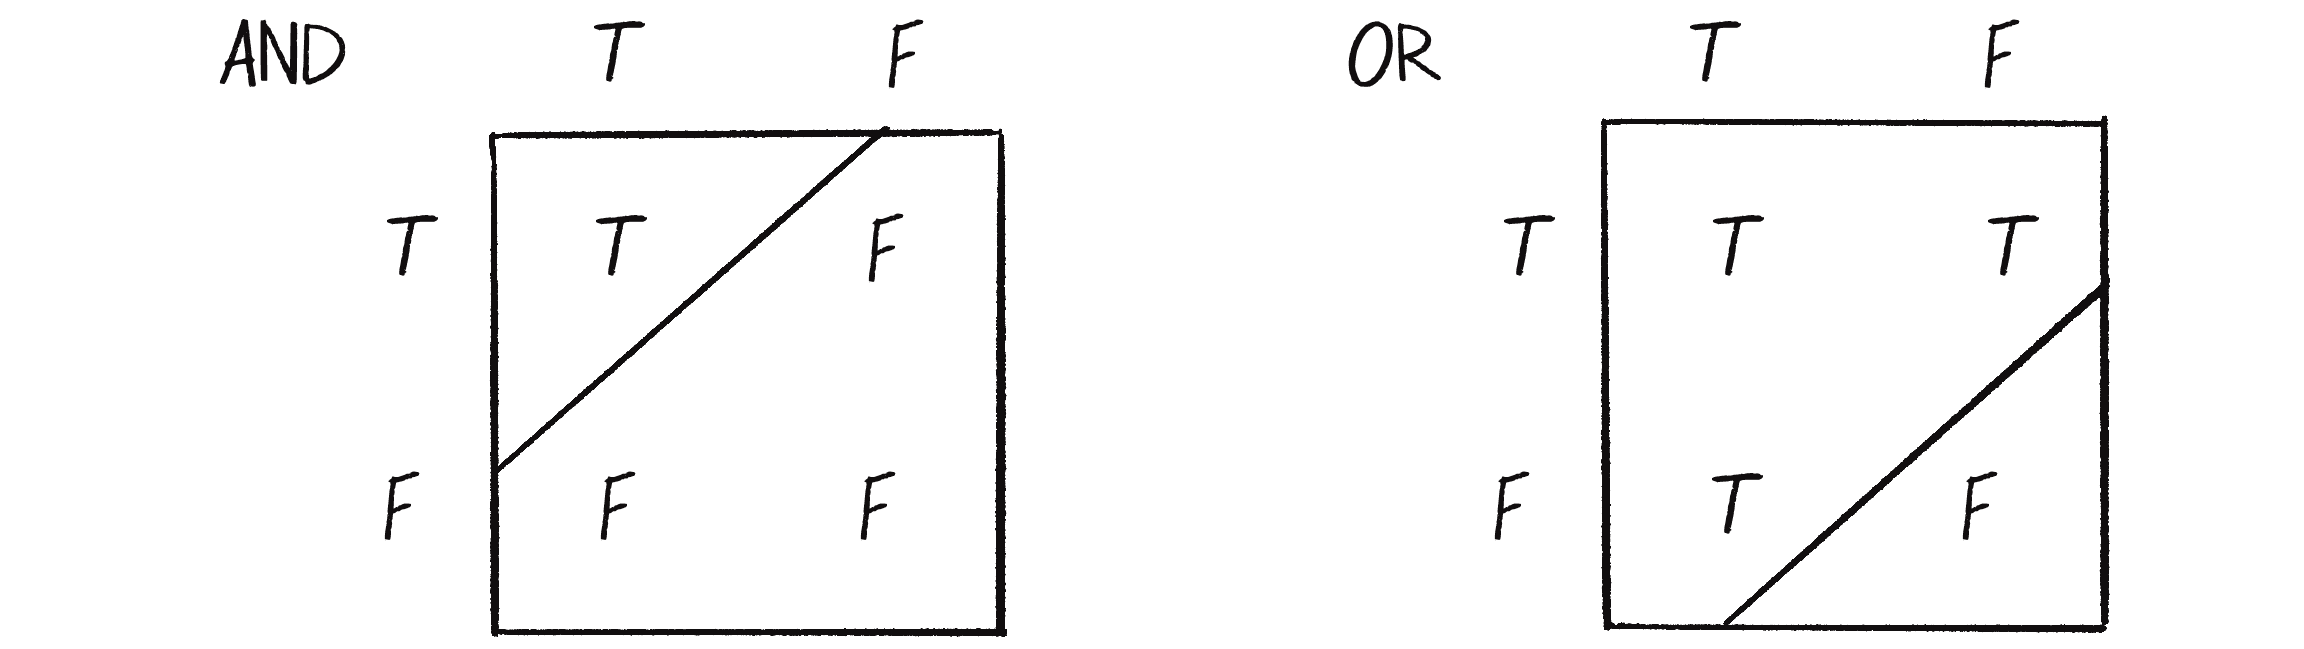 Figure 10.11: Truth tables for the AND and OR logical operators. The true and false outputs can be separated by a line.